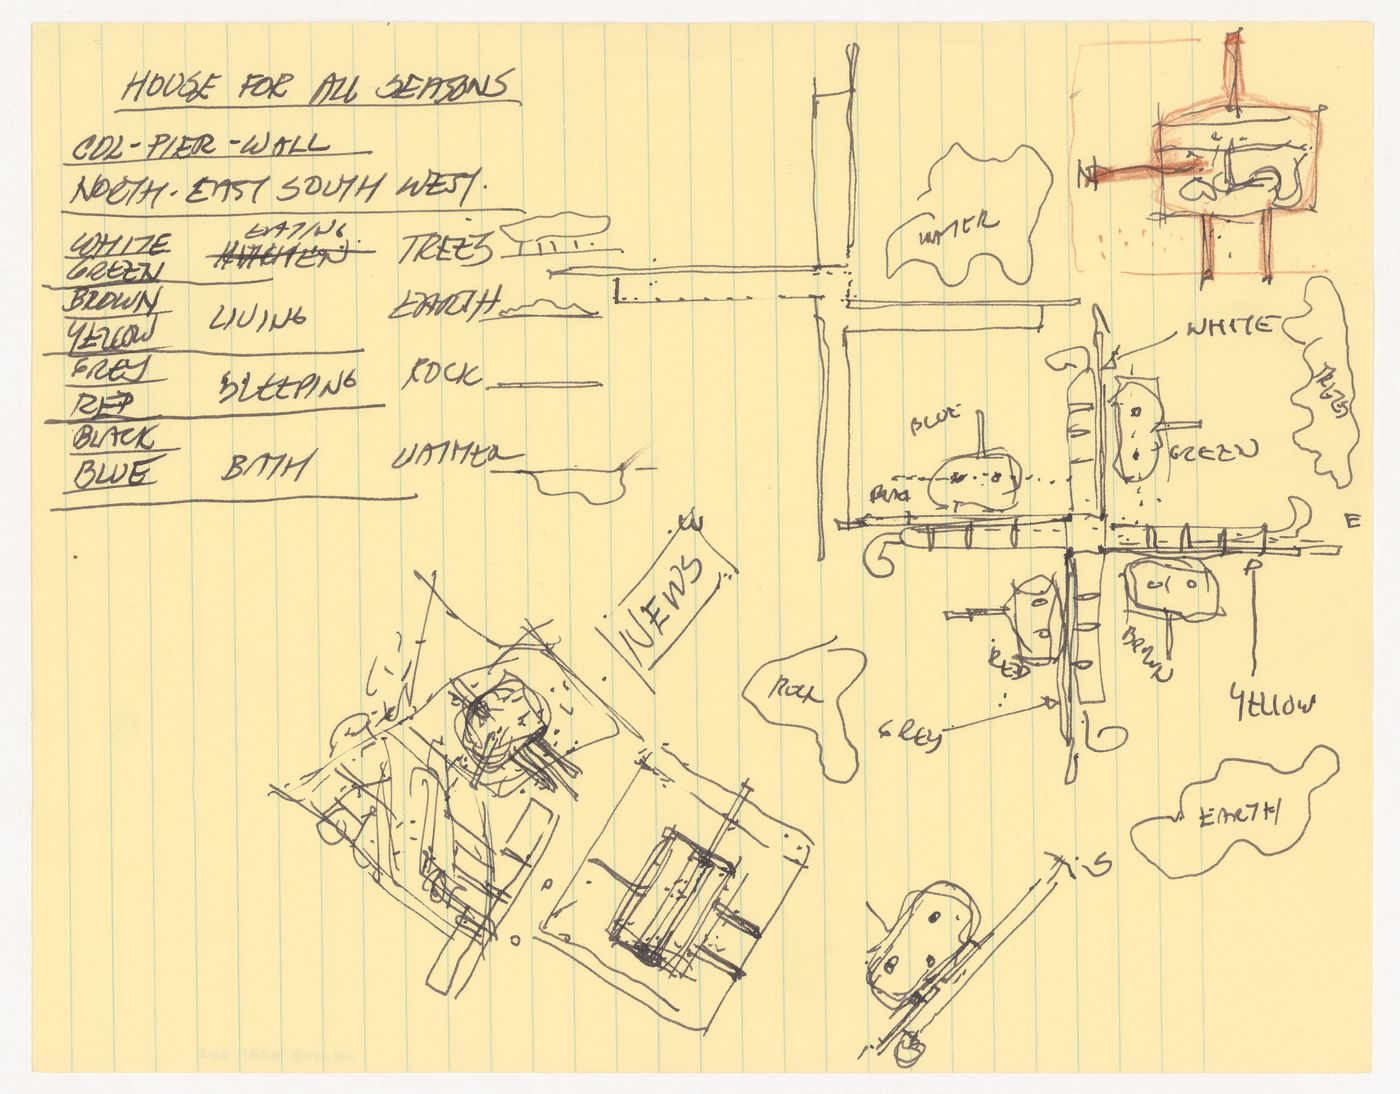 Sketches and notes for North East South West House